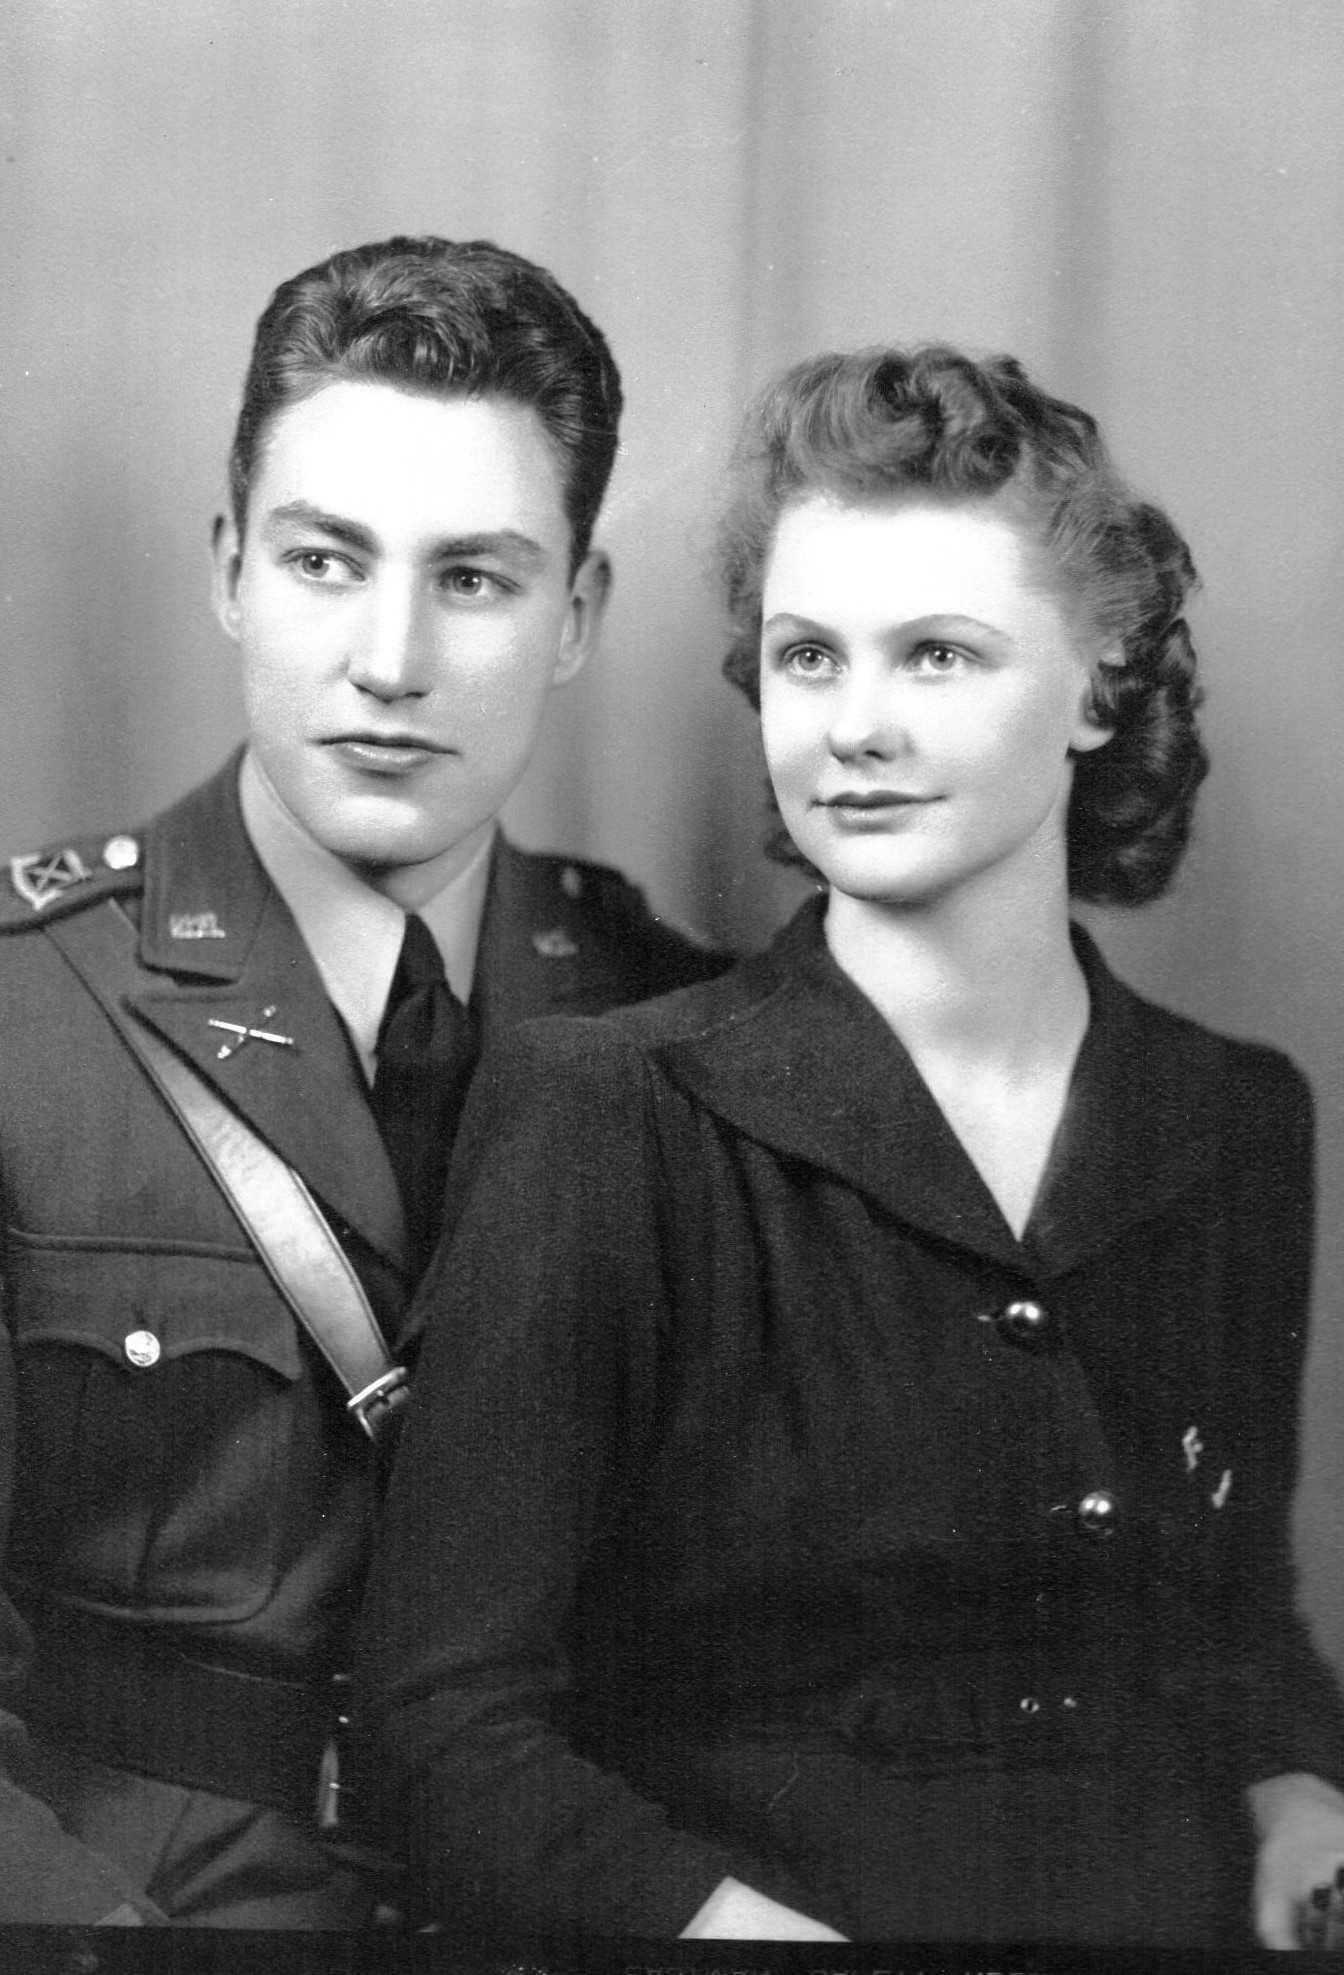 Just after graduation, Dell made second lieutenant in the US Army. While fighting in Europe, Doris had their daughter Diane.